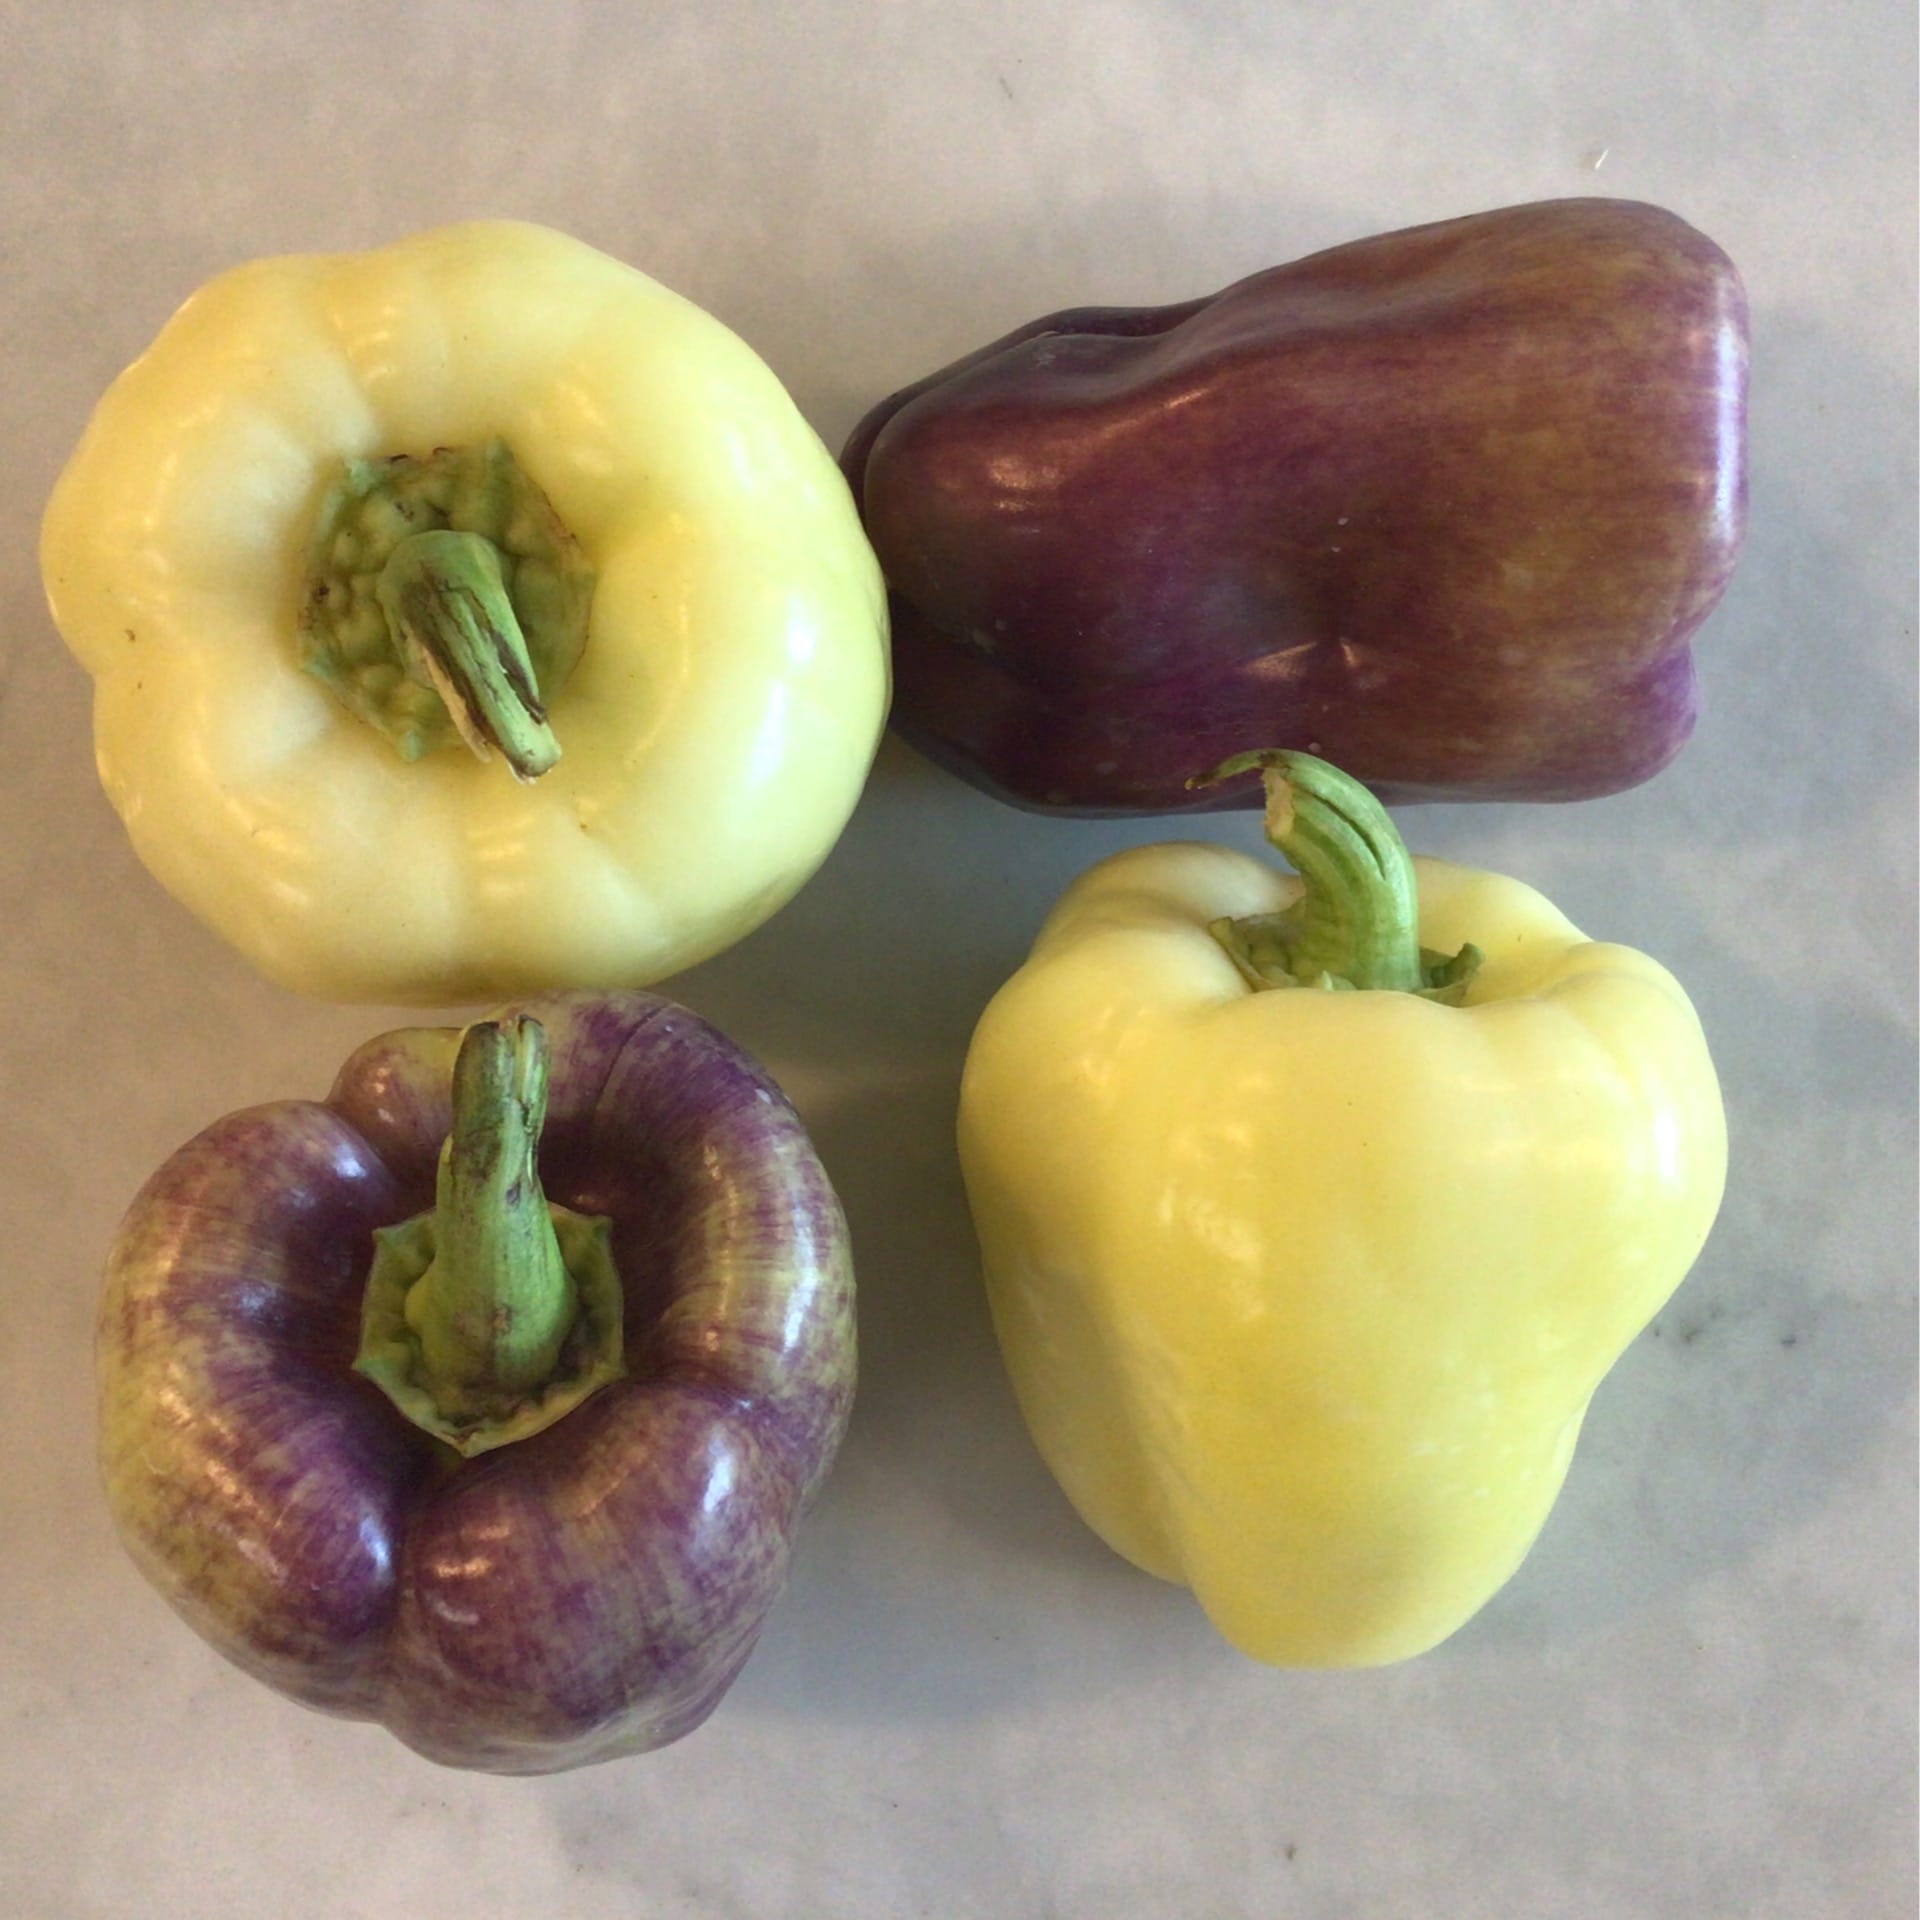 sold out sale lilac and white bell peppers